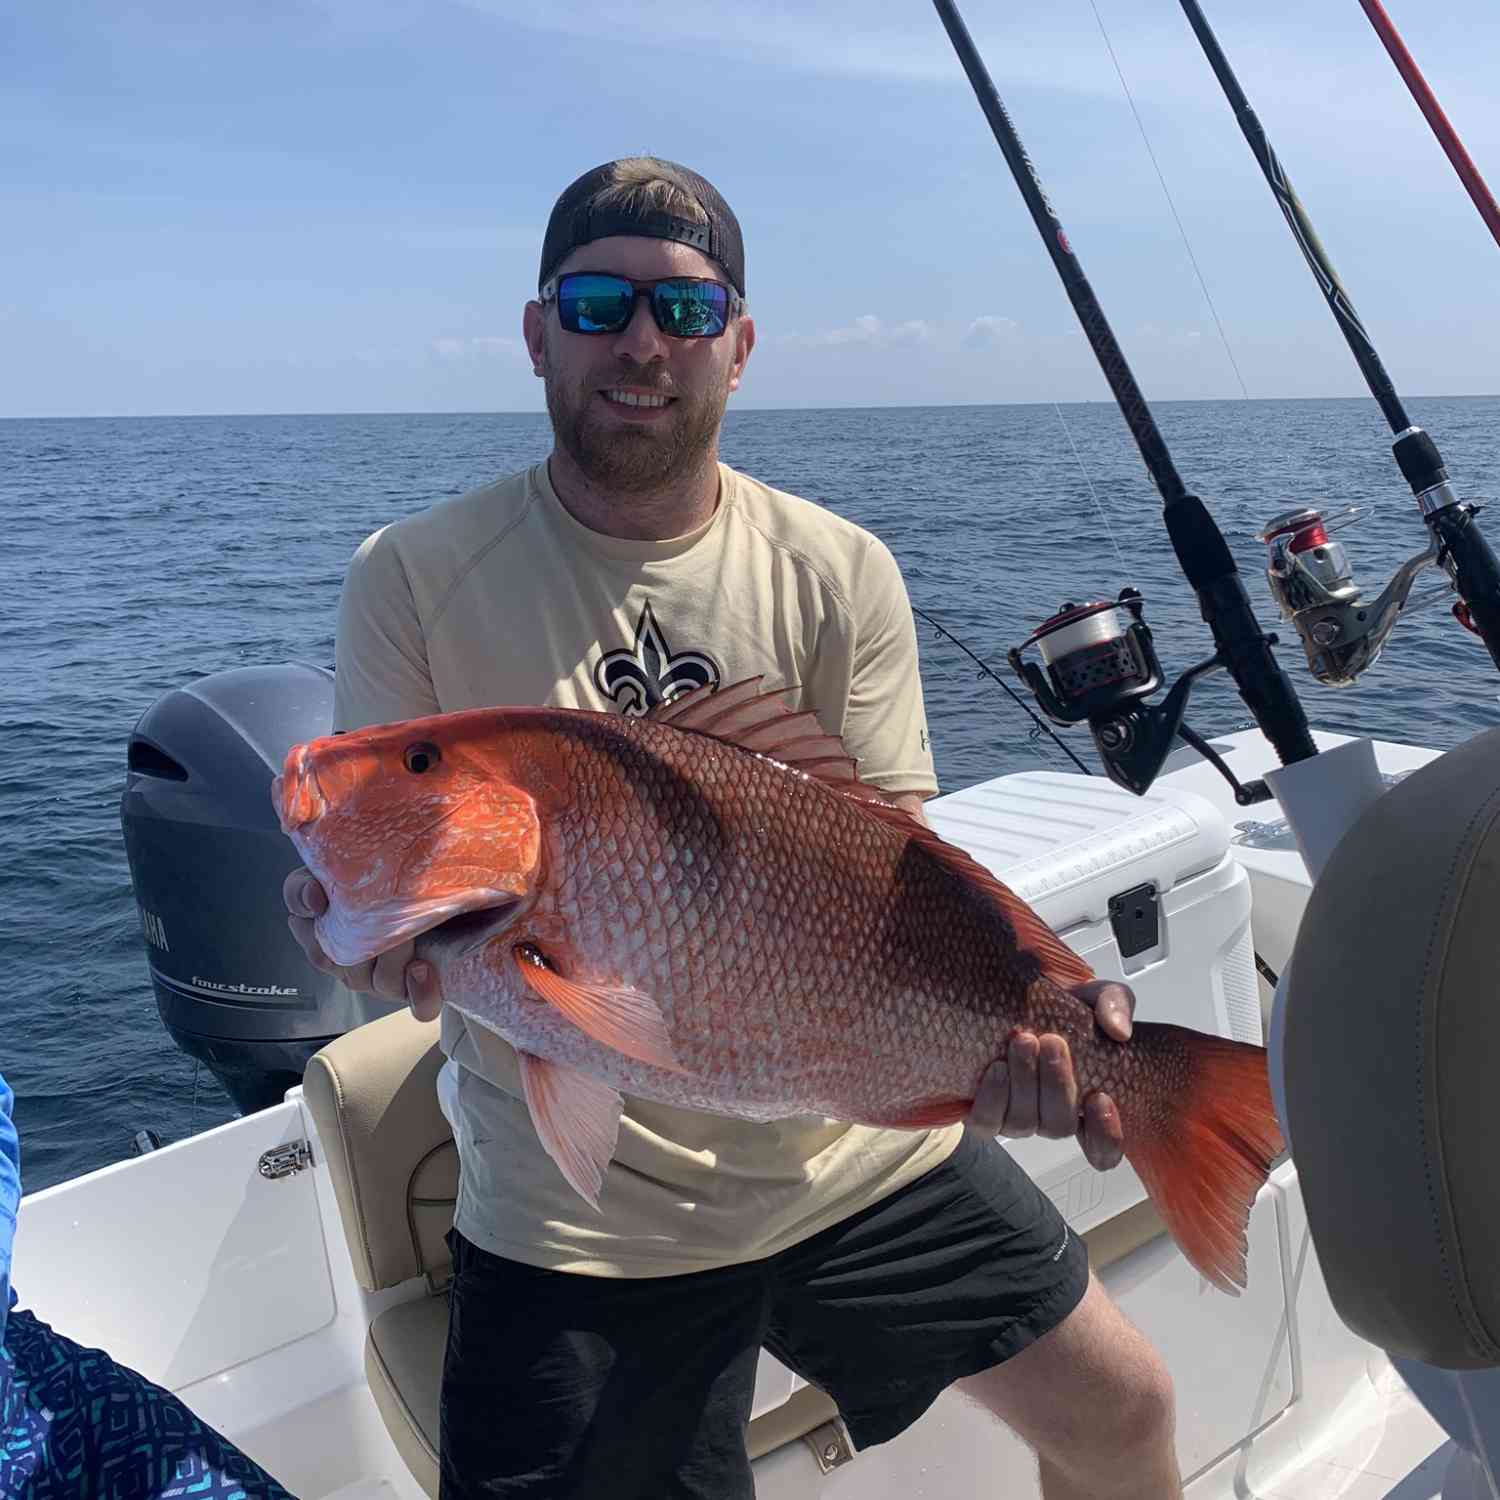 Had a decent day and on our last cast pulled up this big red snapper. We stayed for a few more...